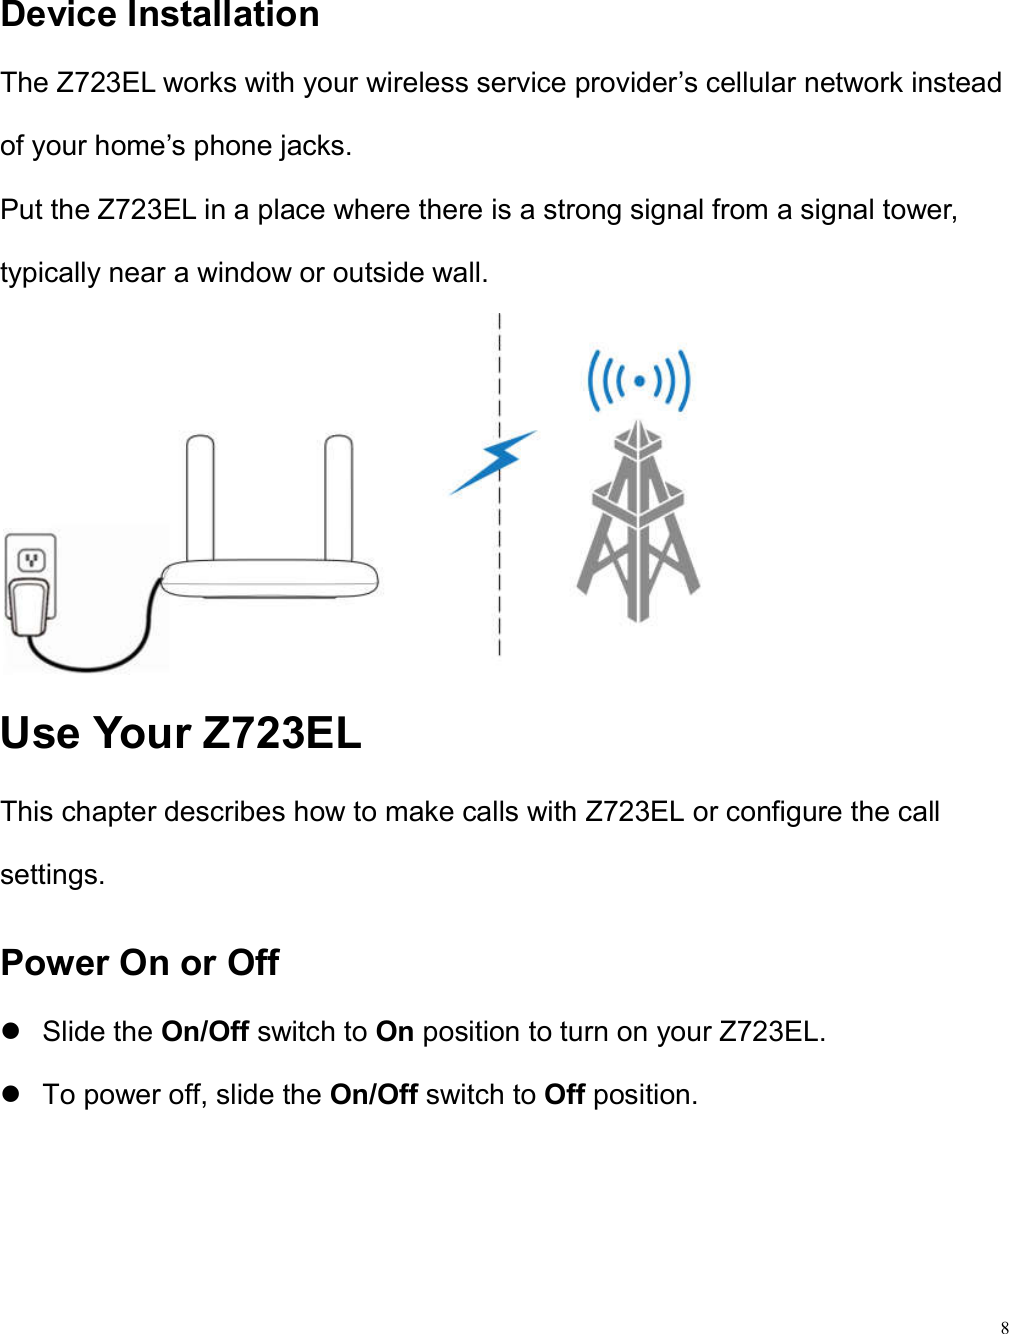 8  Device Installation The Z723EL works with your wireless service provider’s cellular network instead of your home’s phone jacks. Put the Z723EL in a place where there is a strong signal from a signal tower, typically near a window or outside wall.    Use Your Z723EL This chapter describes how to make calls with Z723EL or configure the call settings. Power On or Off   Slide the On/Off switch to On position to turn on your Z723EL.   To power off, slide the On/Off switch to Off position.  